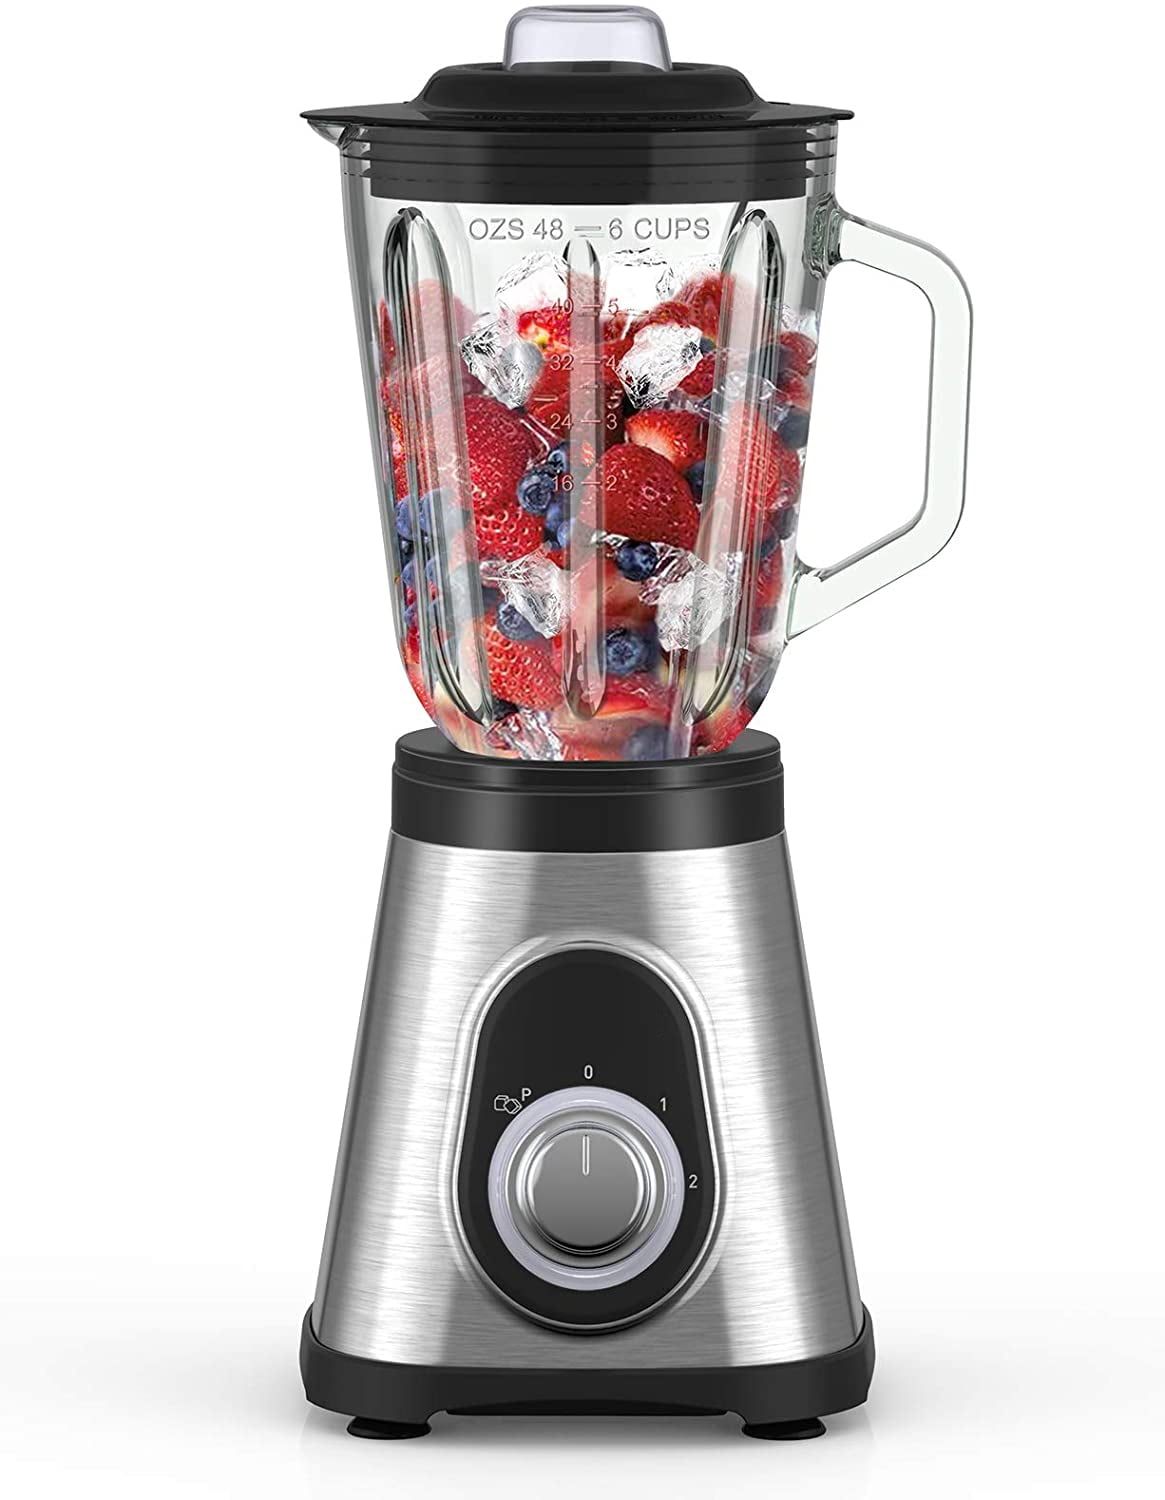 Is This the Best Glass Pitcher Blender? 